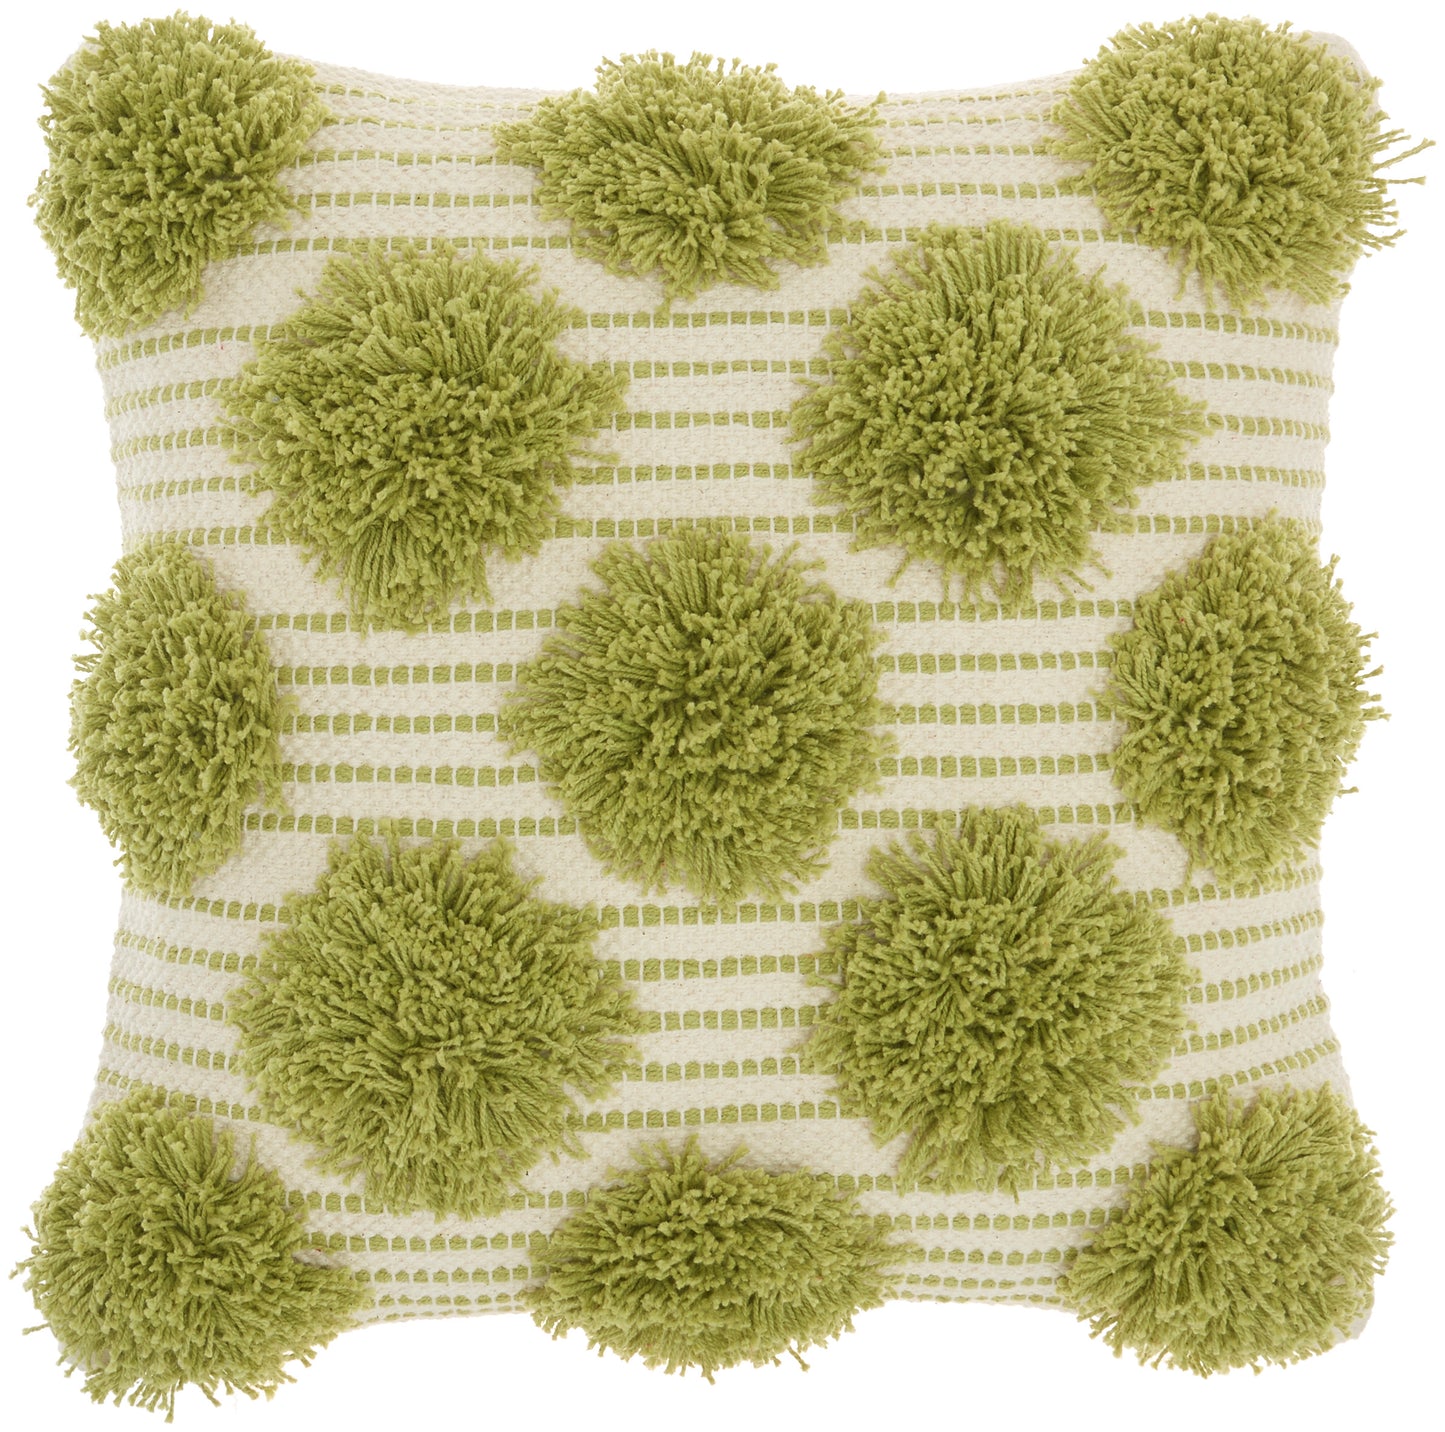 Life Styles GC575 Cotton Tufted Pom Poms Throw Pillow From Mina Victory By Nourison Rugs